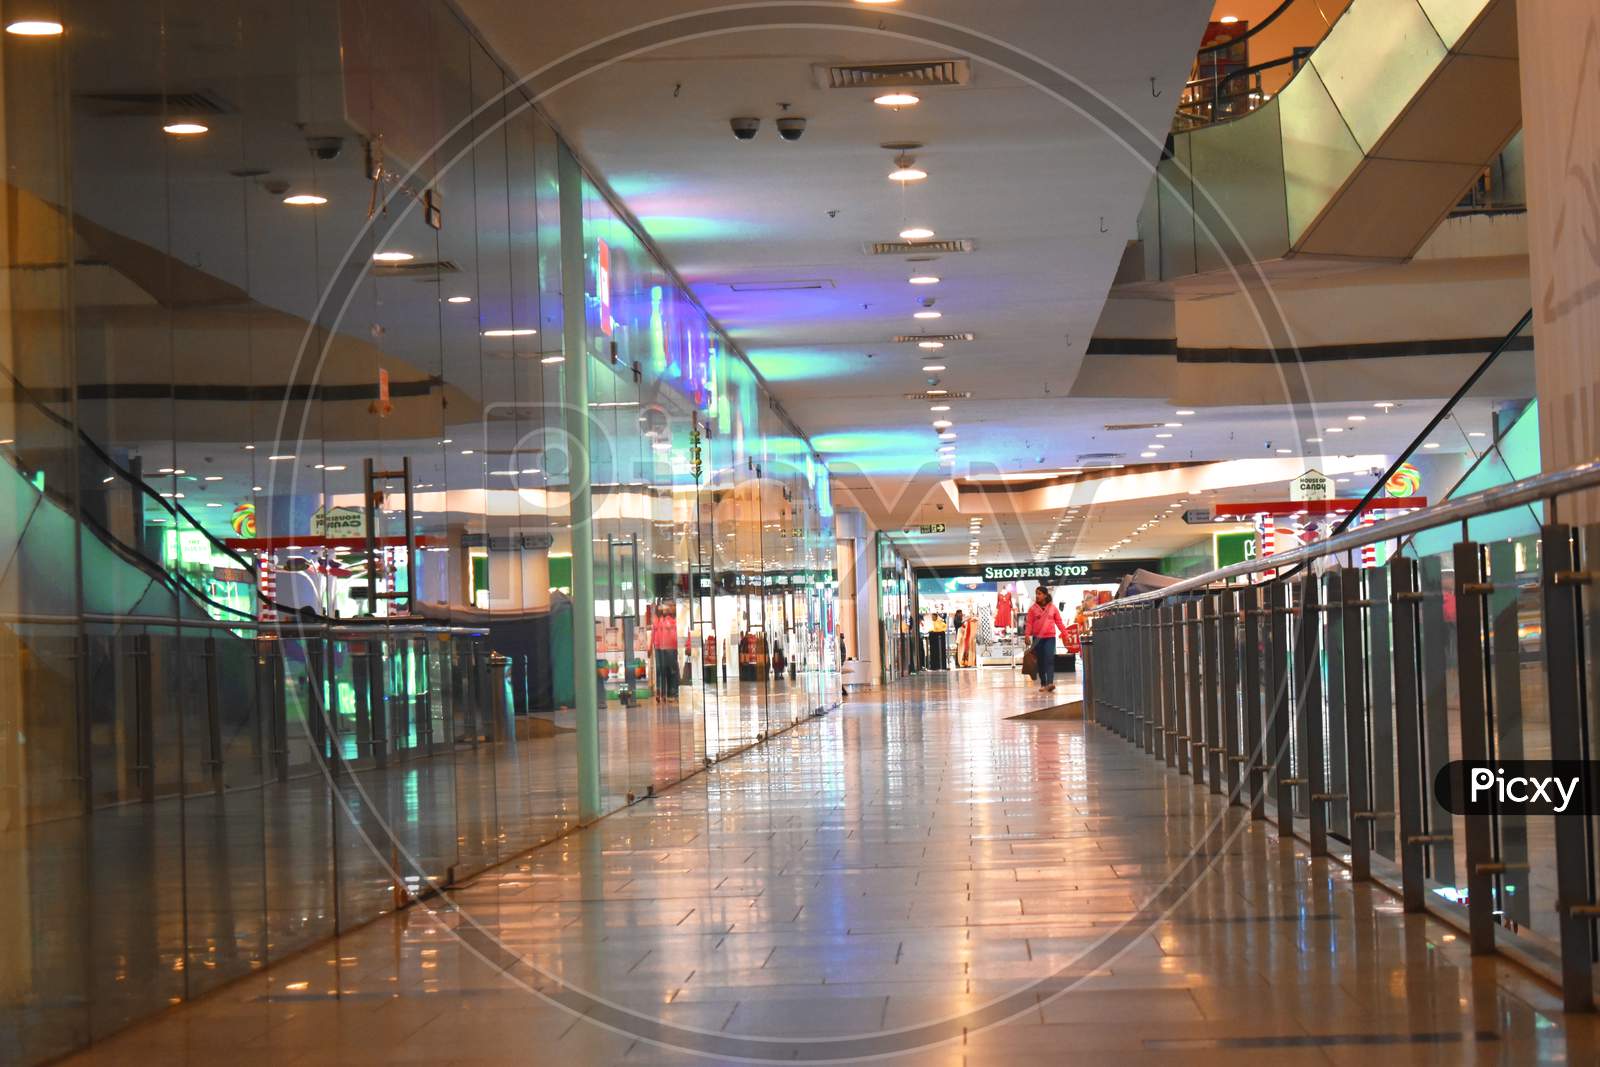 Image Of A Colorful Indore Of A Shopping Mall